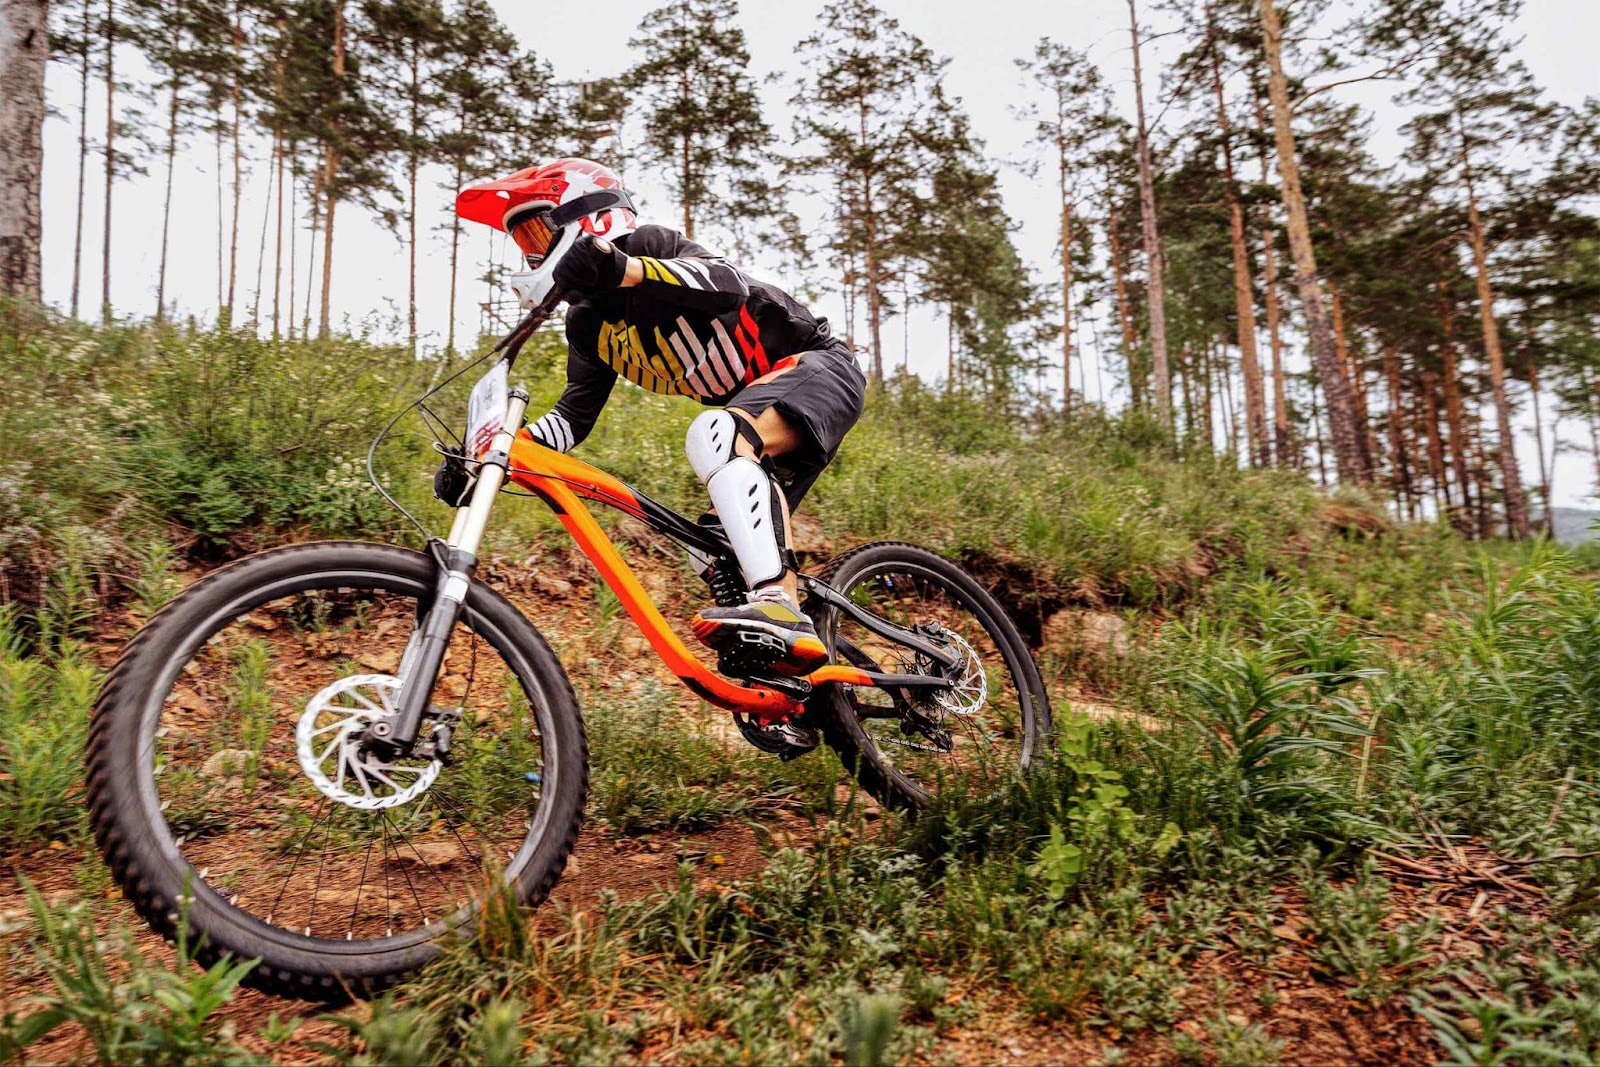 A downhill biker on a steep trail, highlighting the sturdy build of mountain bikes, crucial for how to choose a mountain bike for downhill riding